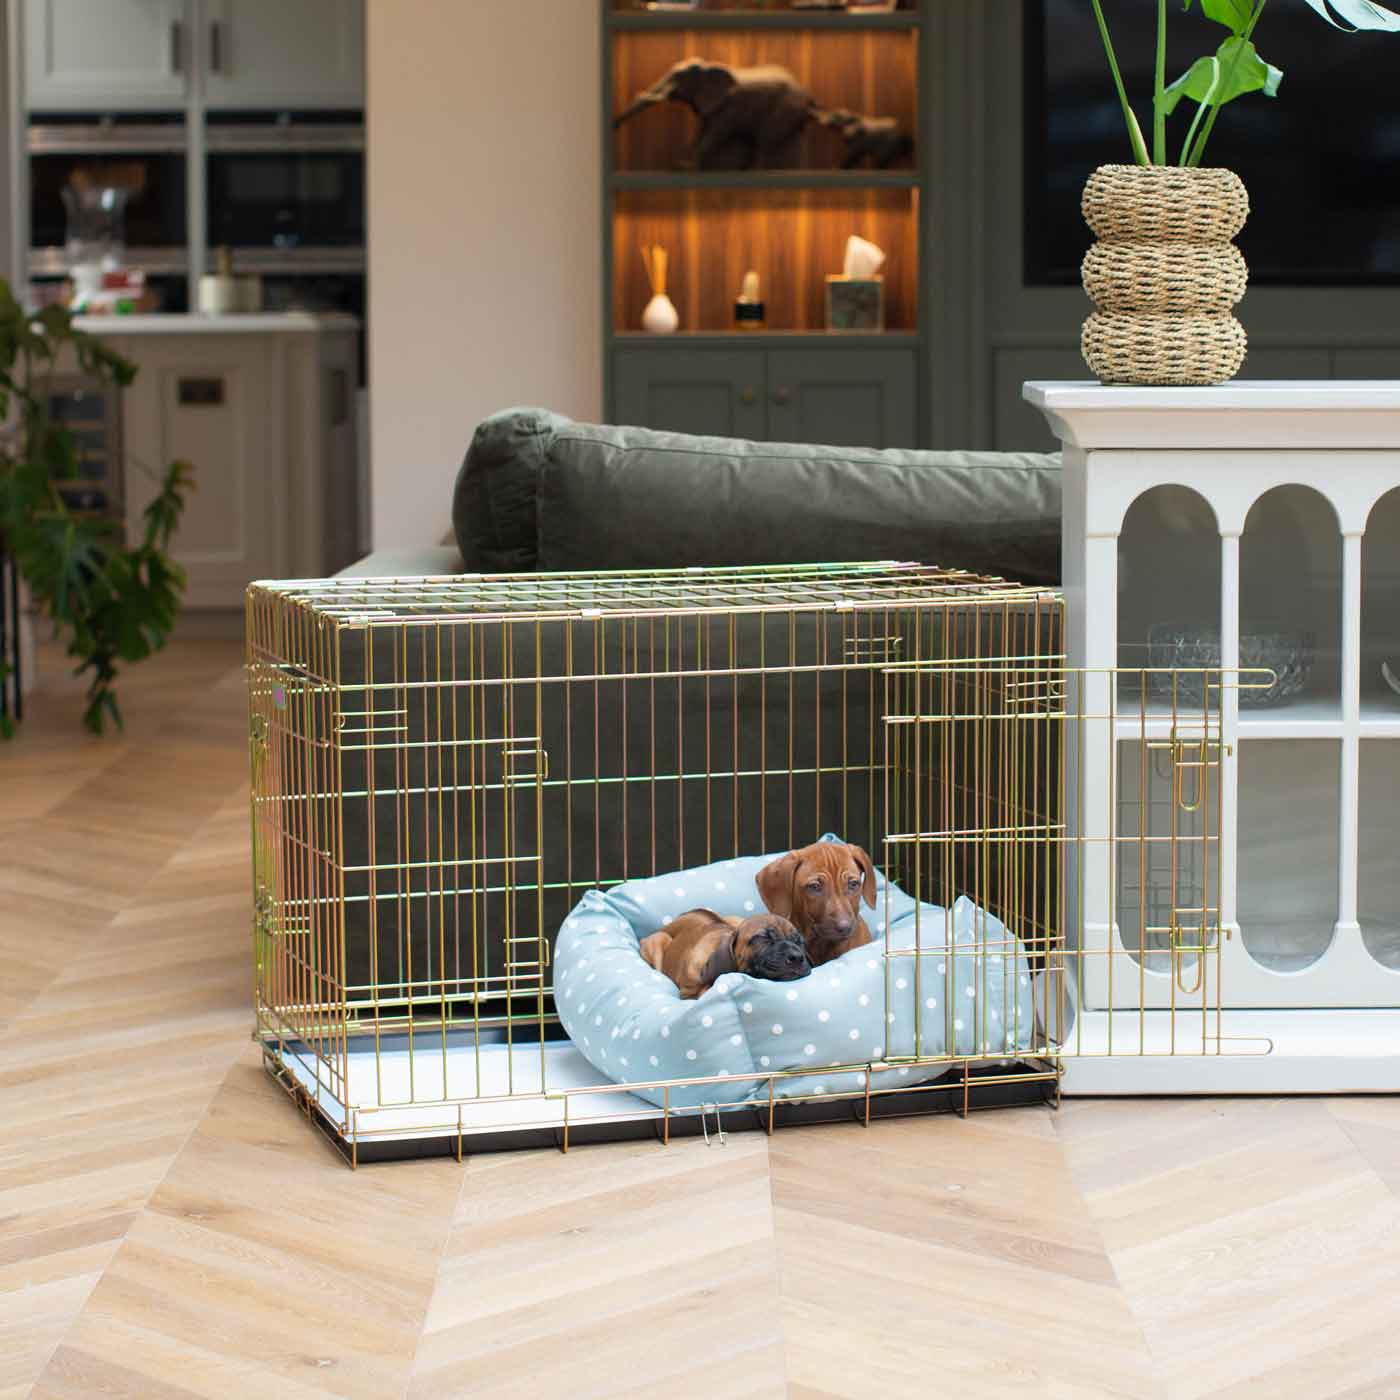 Luxury Gold Dog Cage With Cozy & Calm Puppy Cage Dog Bed, in Duck Egg Spot. The Perfect Dog Crate For The Ultimate Naptime, Available Now at Lords & Labradors US